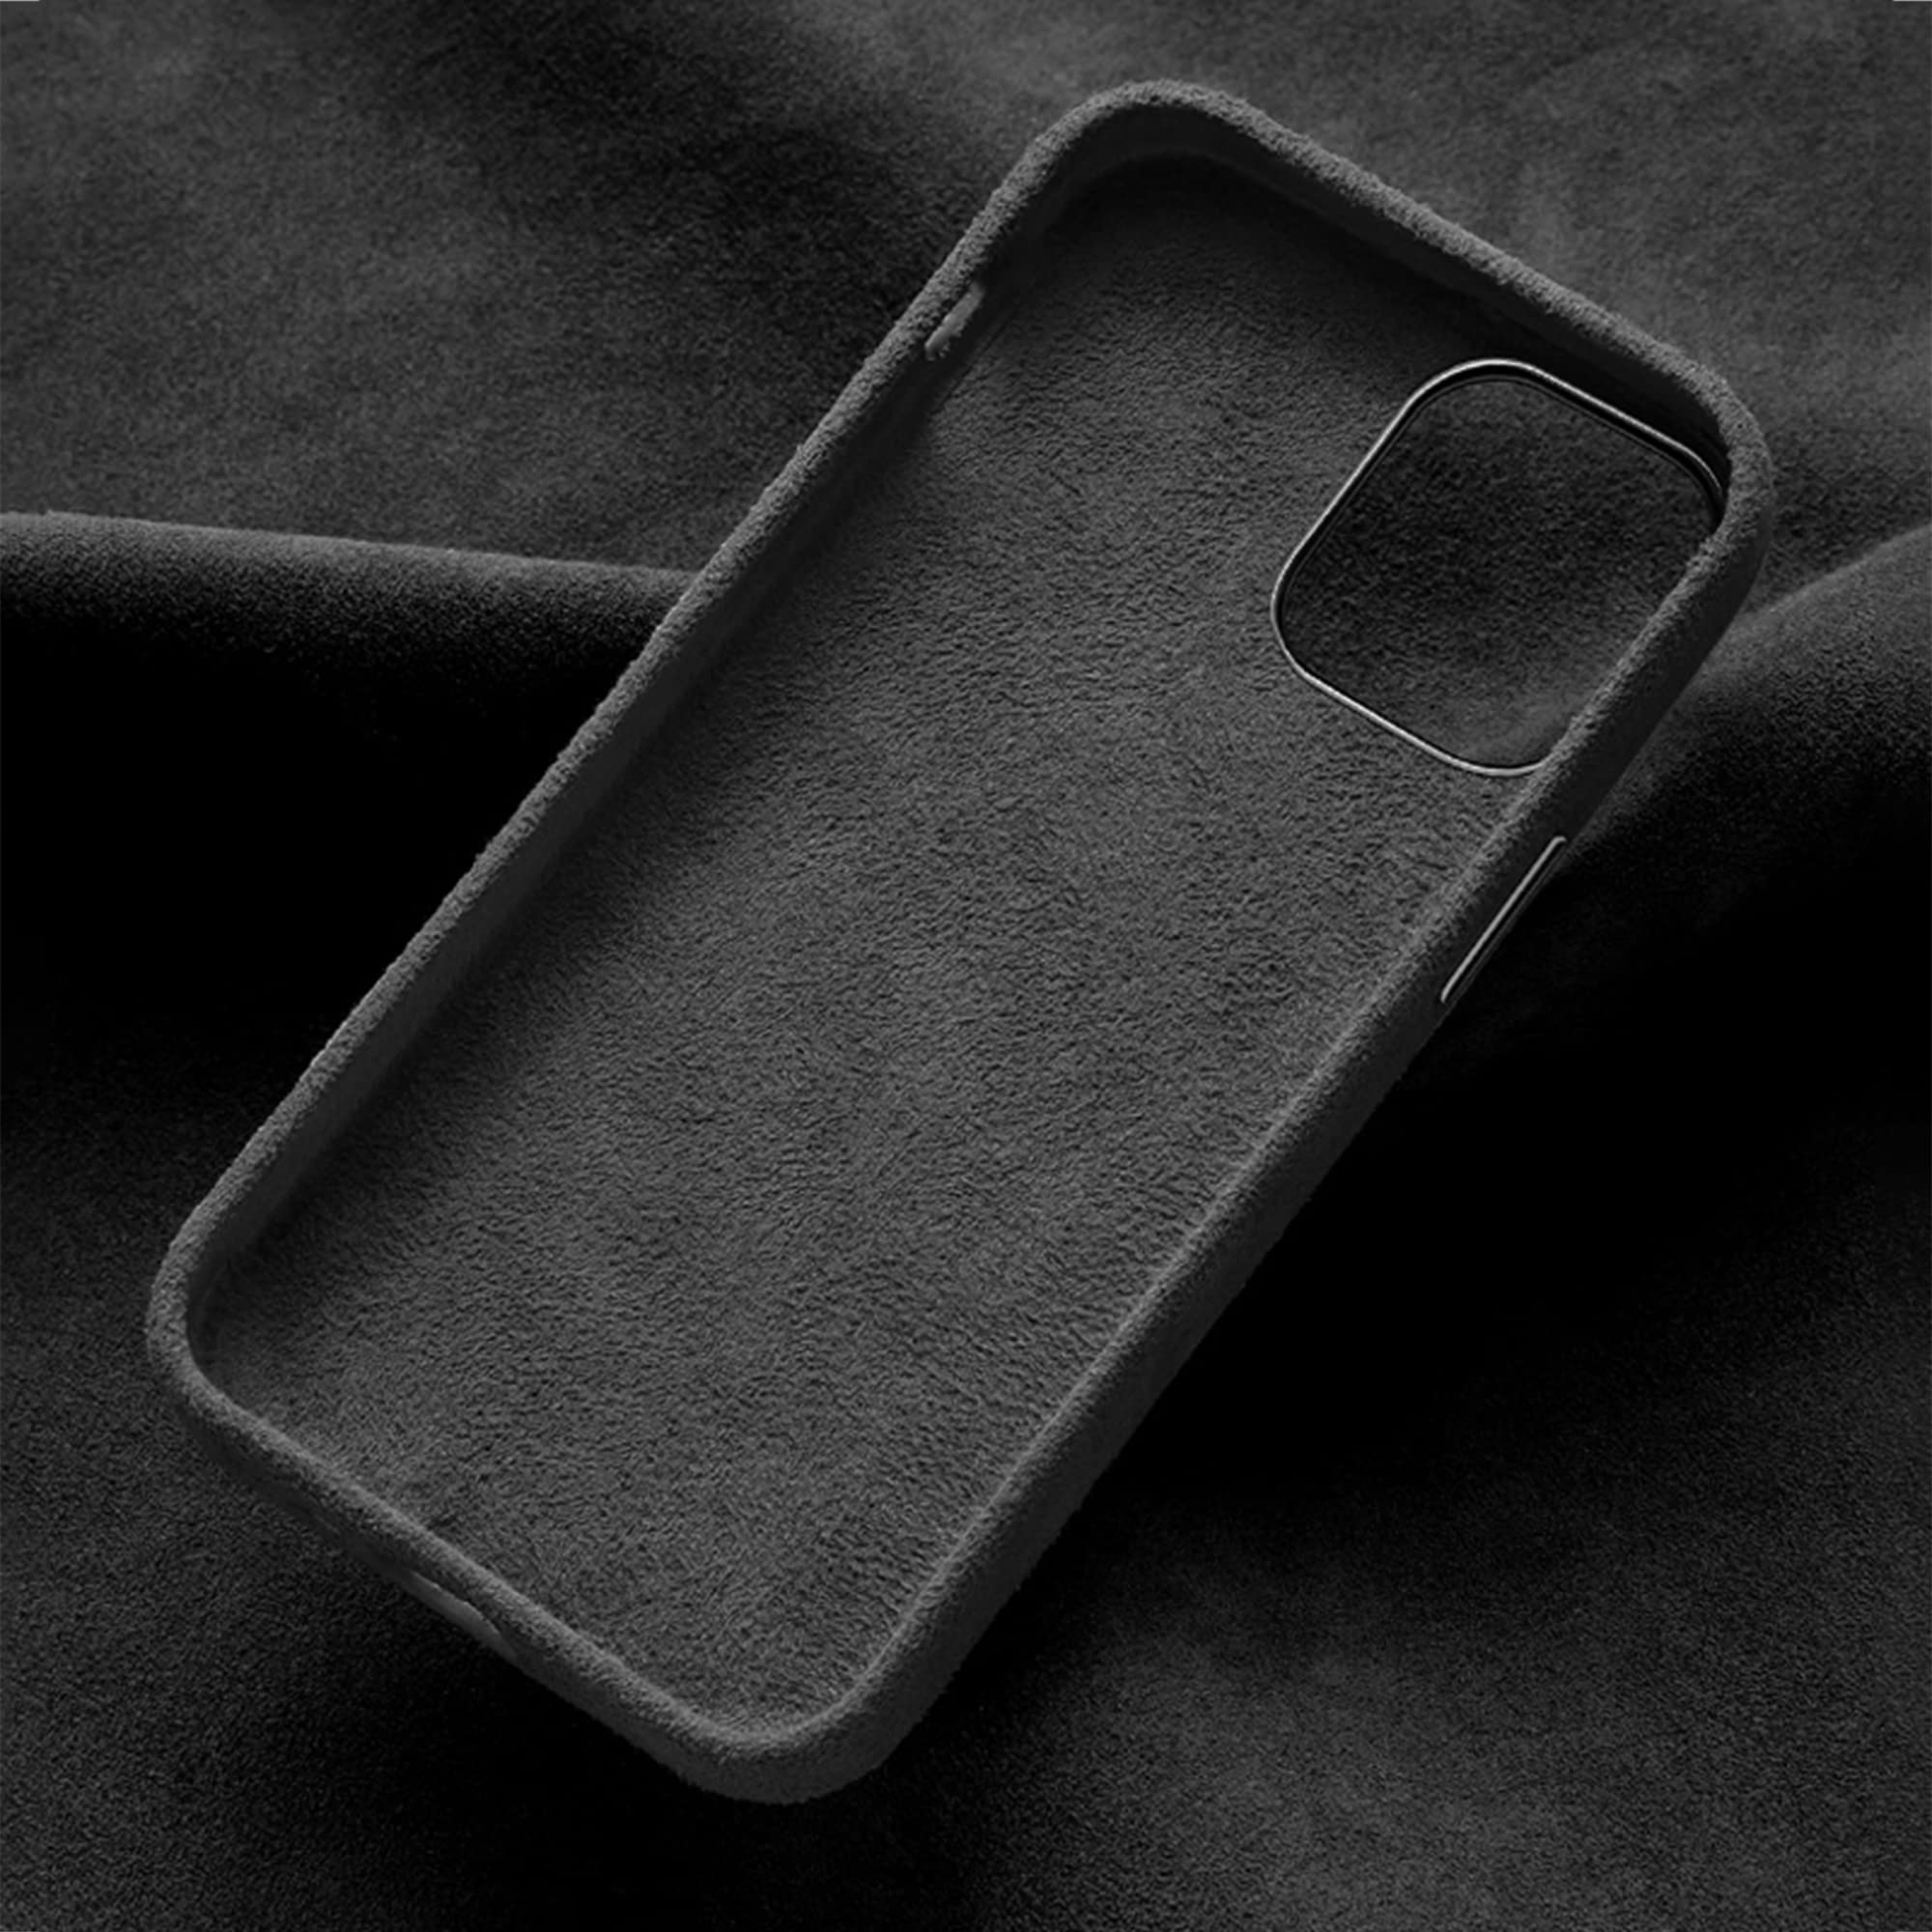 Komodoty Saguaro Case. Luxury Alcantara iPhone 12 Series Cases. Premium Italian Imported Material. Fully Wrapped Four Side Protection. (Black, iPhone 12 Pro Max)